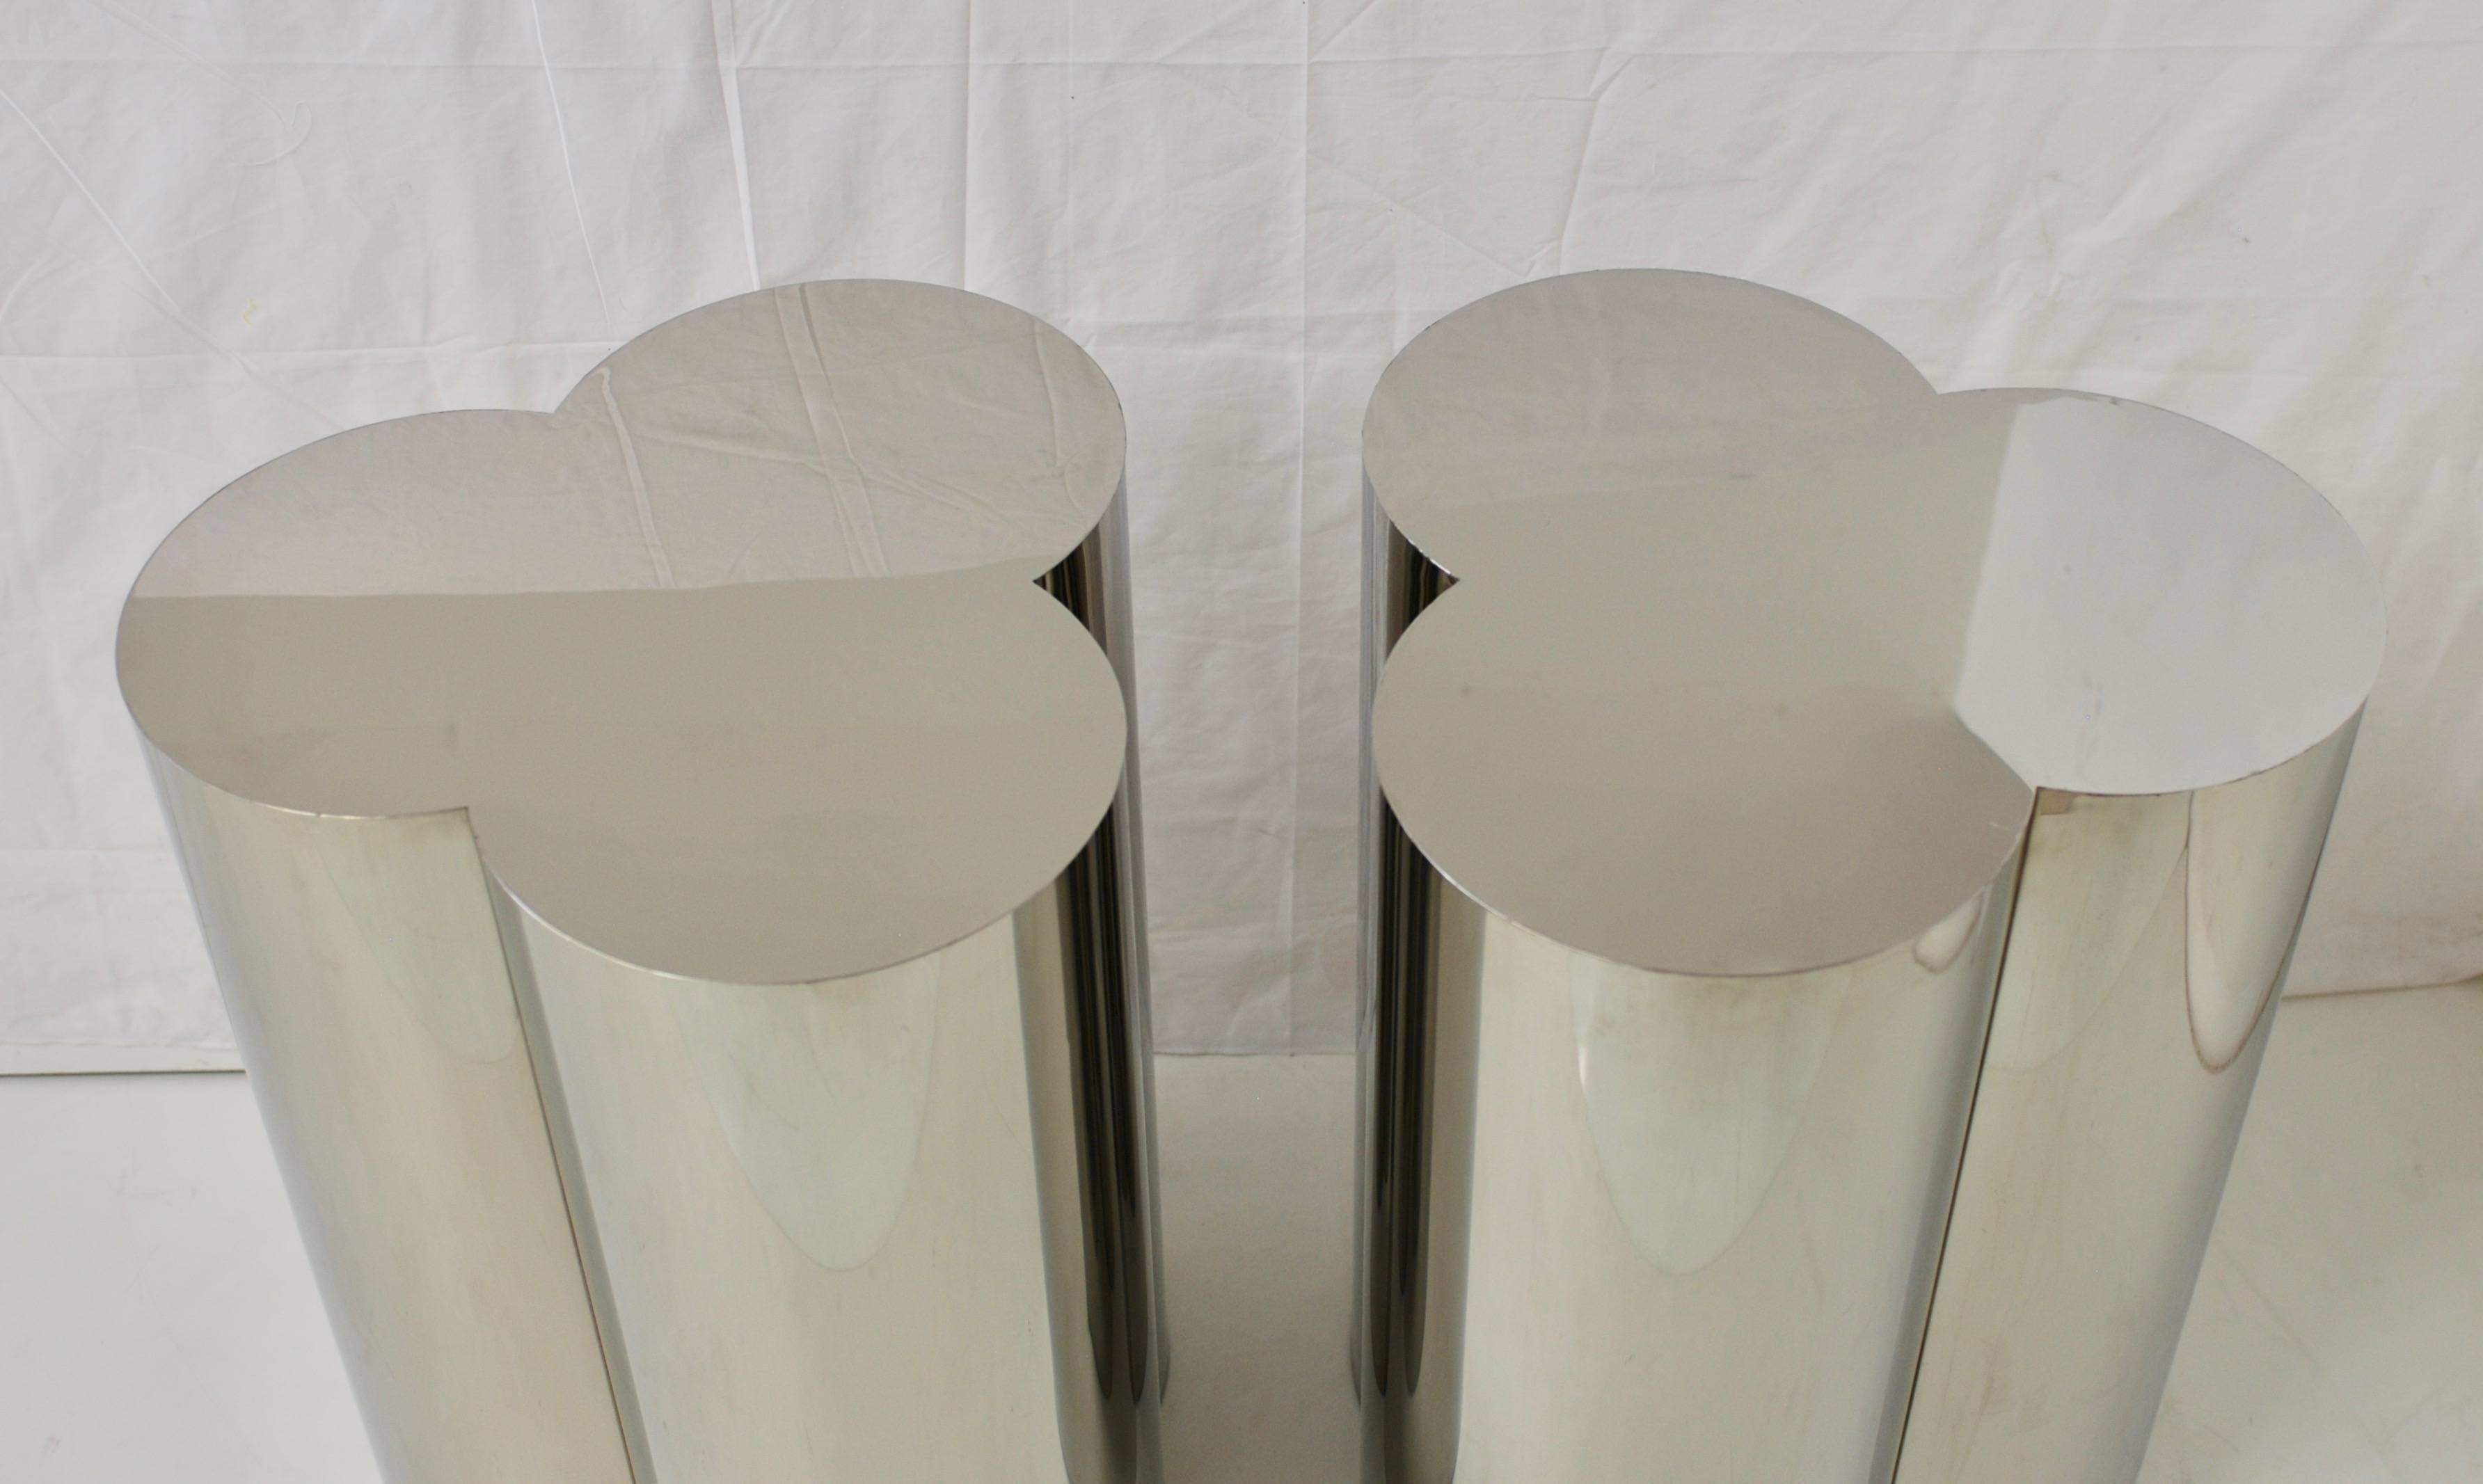 American Pair of Chrome Finish Clover Pedestal Table Bases Attributed to C. Jere